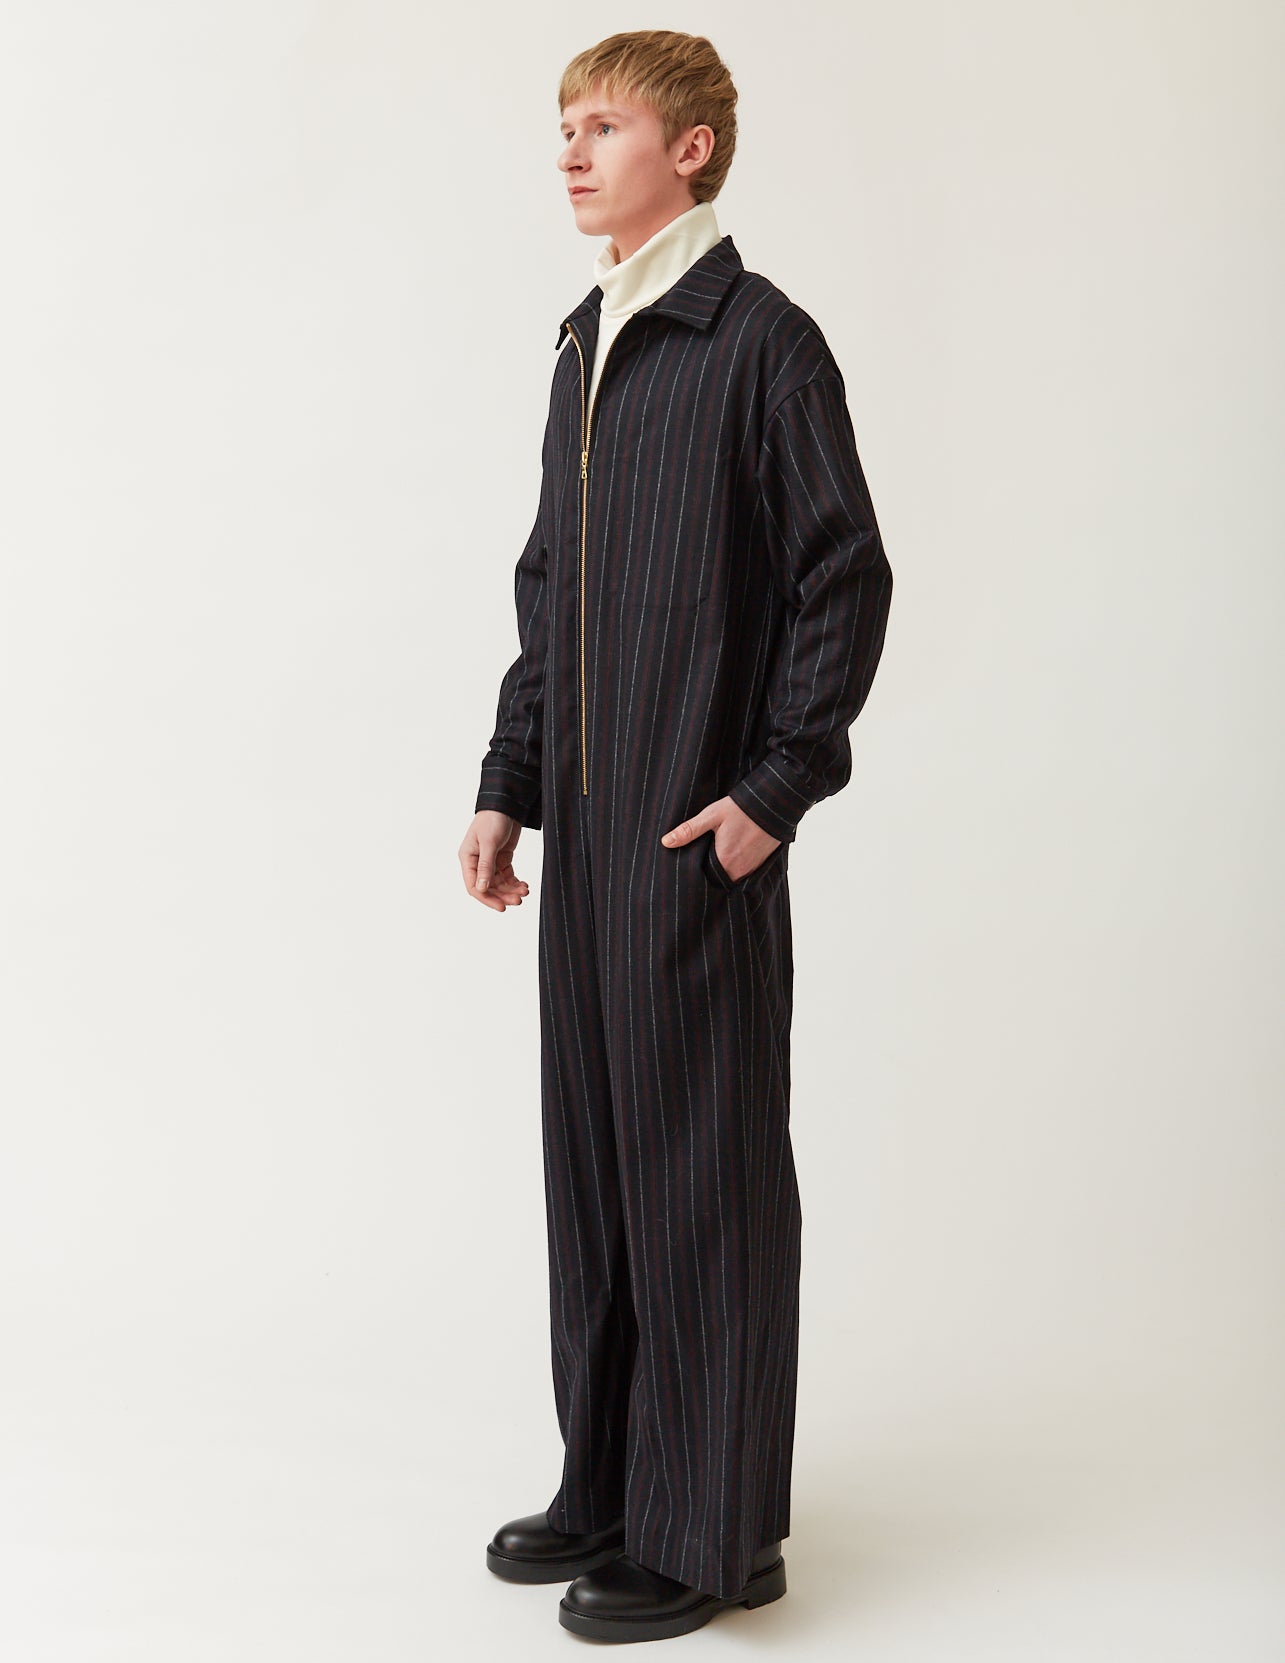 Collared & Cuffed Jumpsuit navy x white & red pinstripe